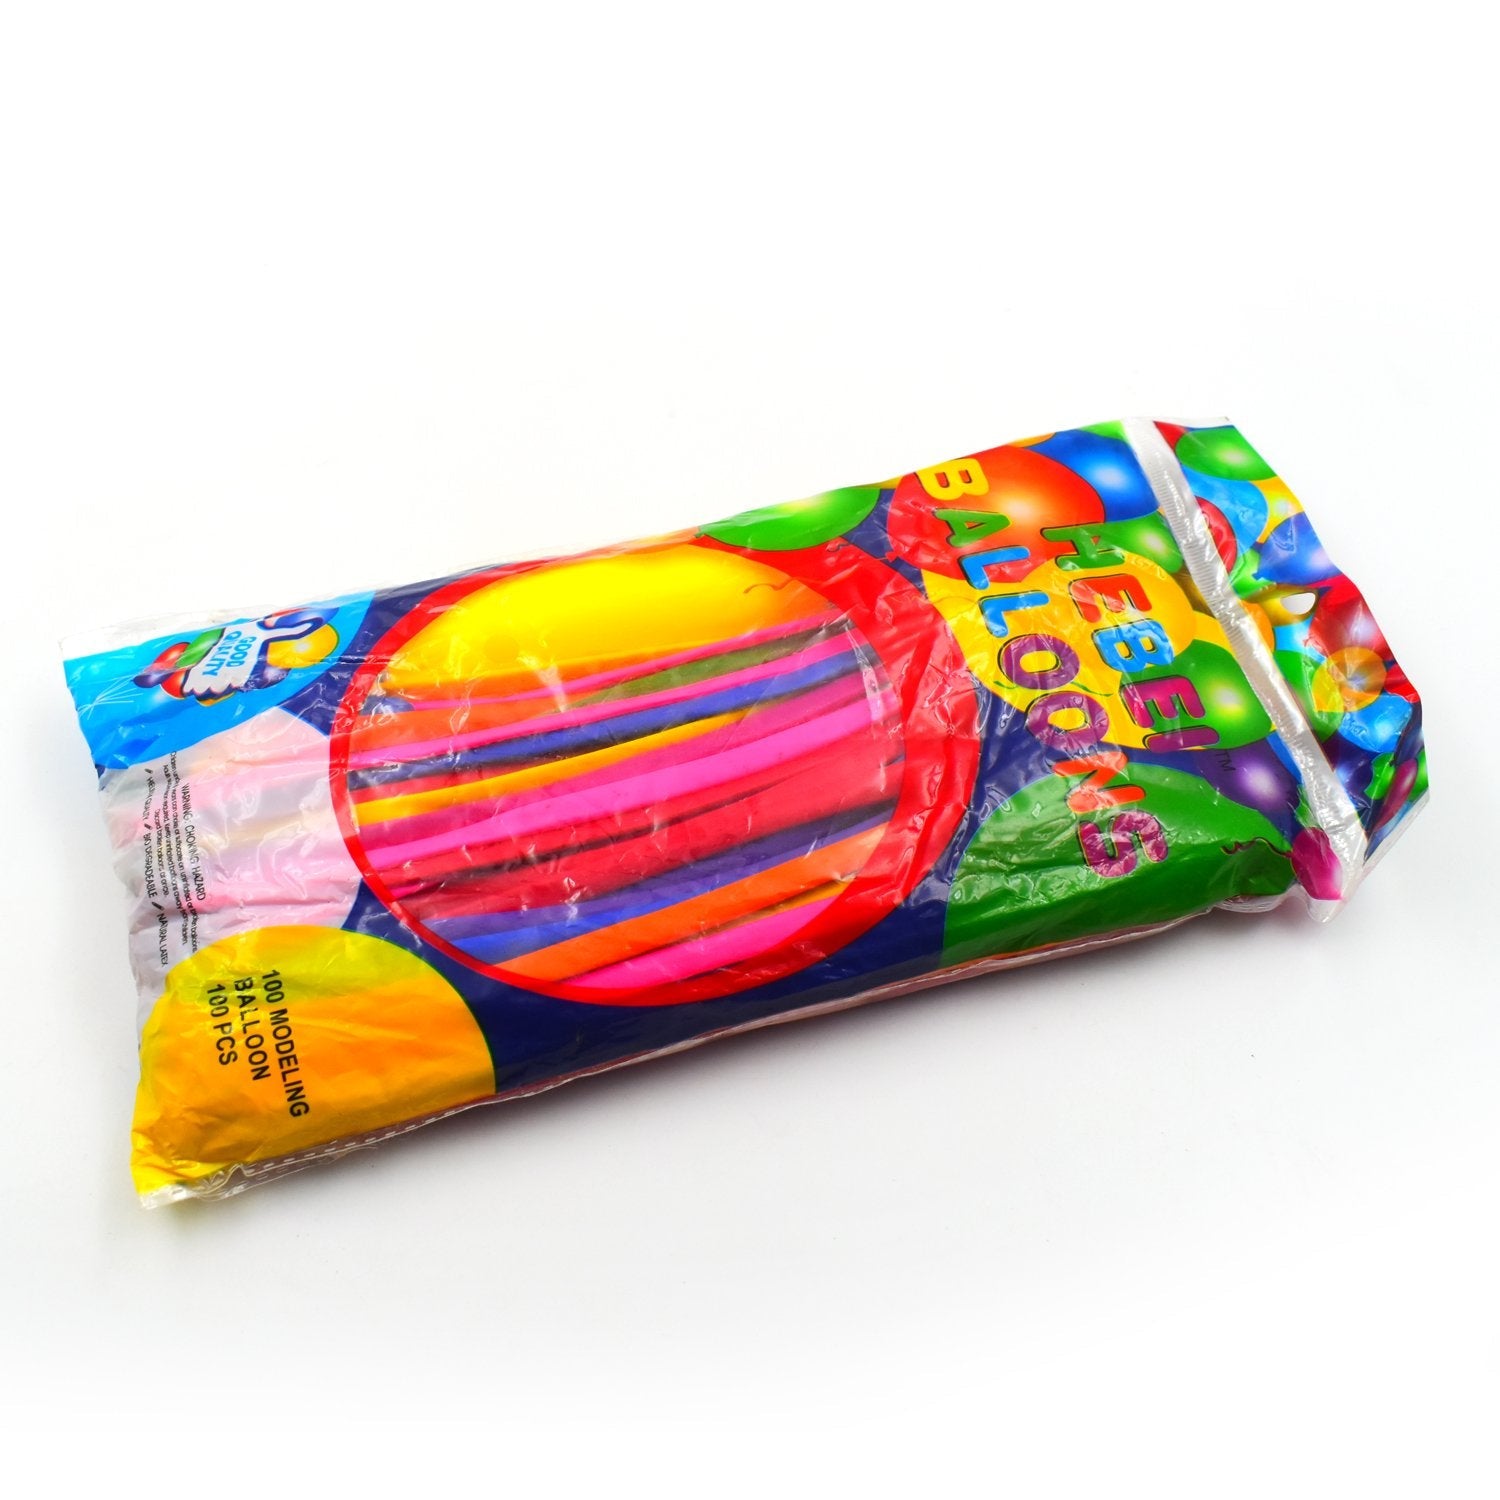 4729 Handy Air Balloon Pumps for Foil Balloons and Inflatable Toys 